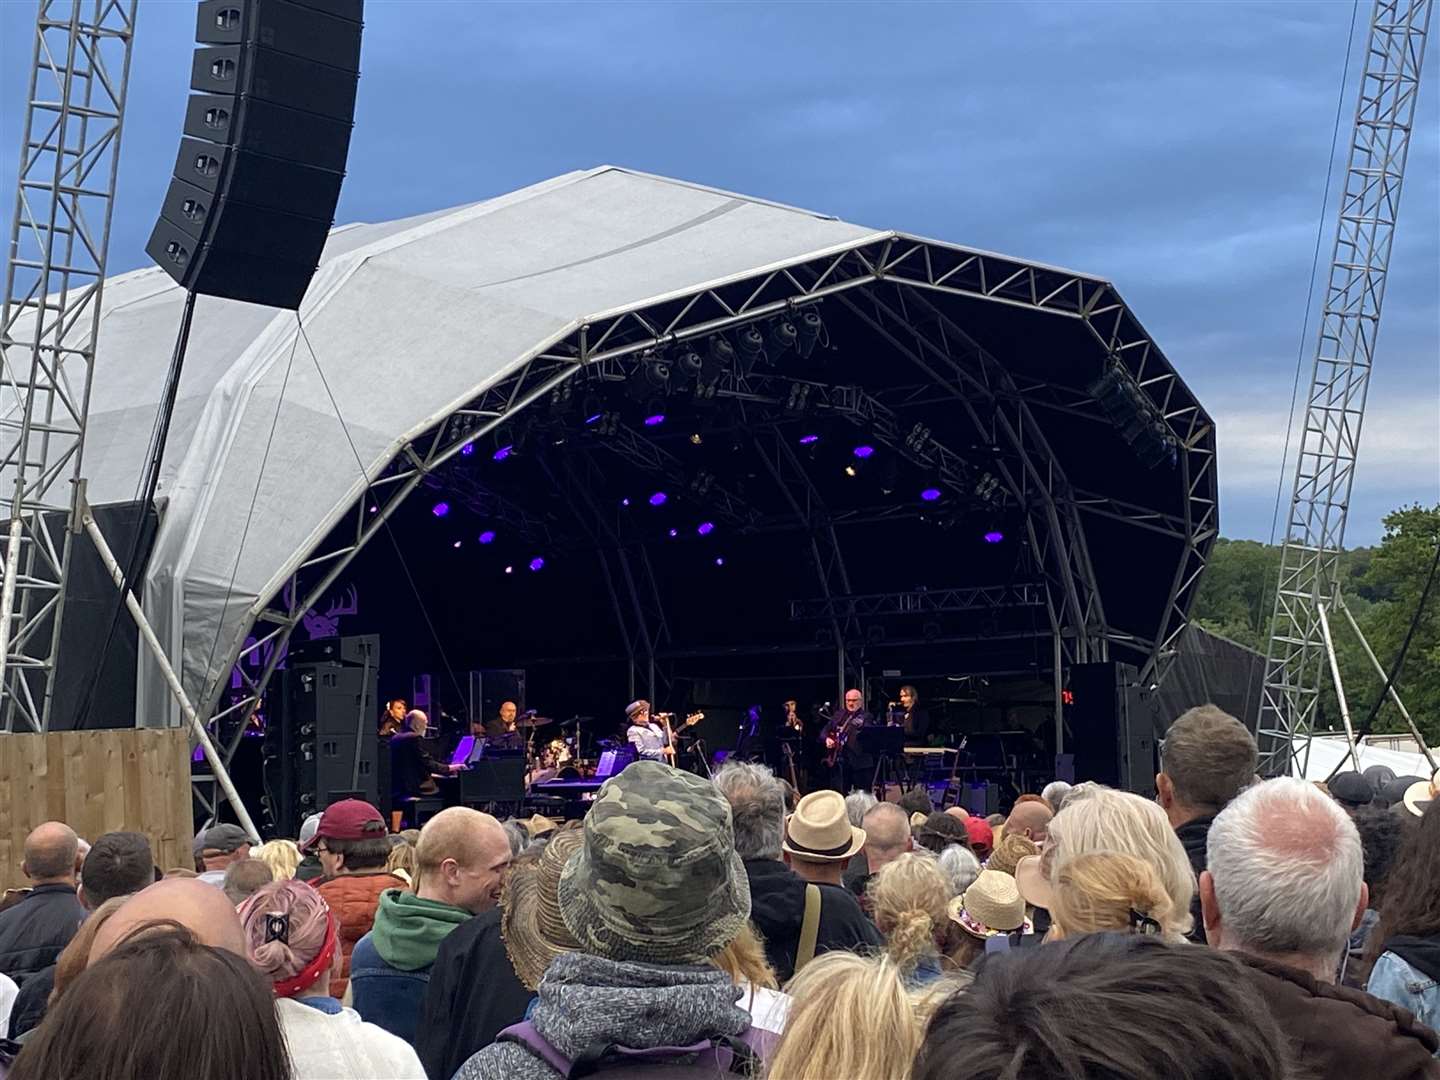 Van Morrison performed on the main stage